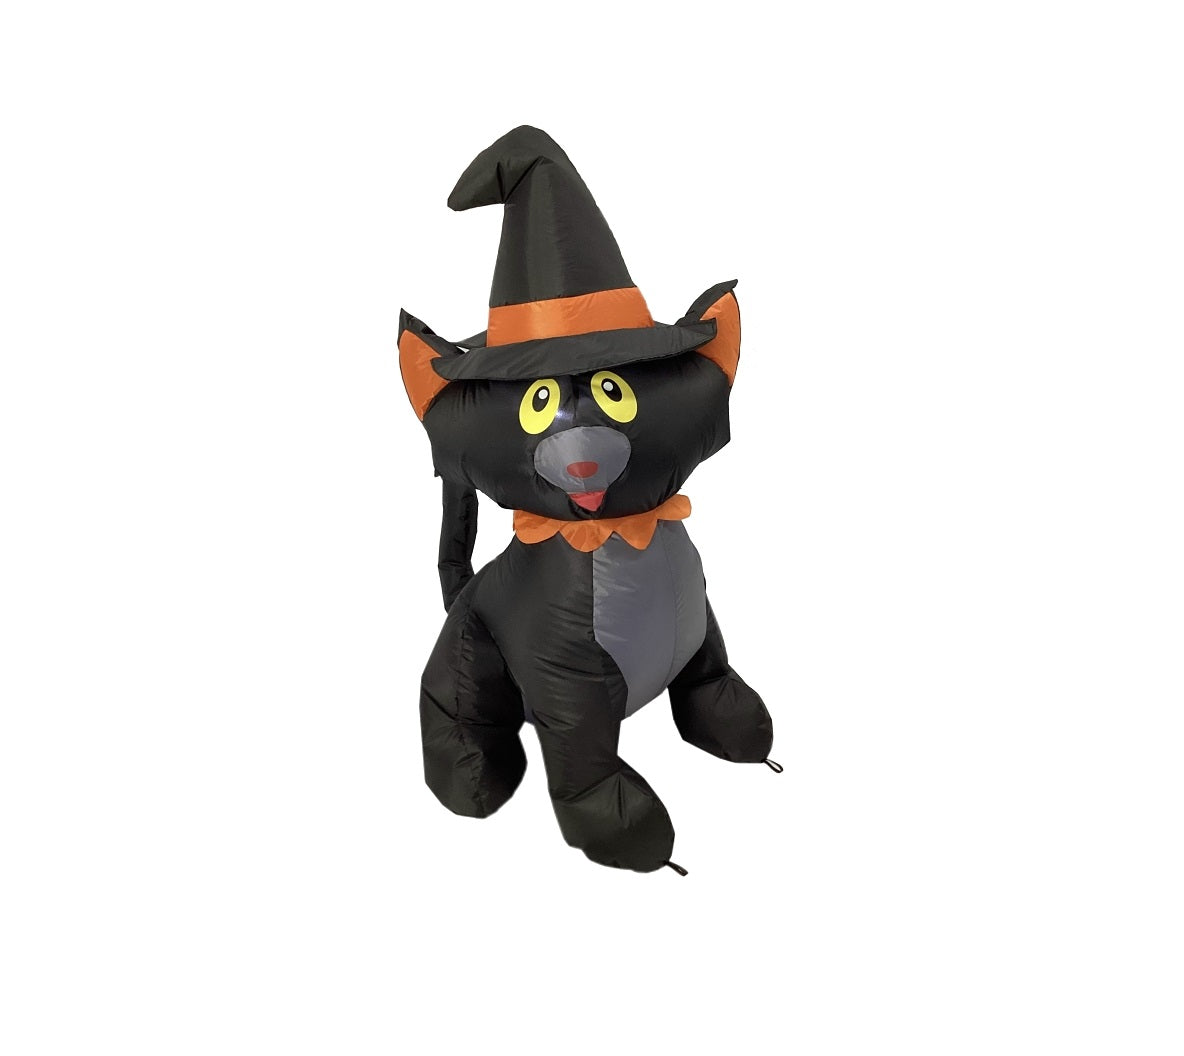 Santas Forest 90847 Inflatable Halloween Cat, Black/White, 4 Ft